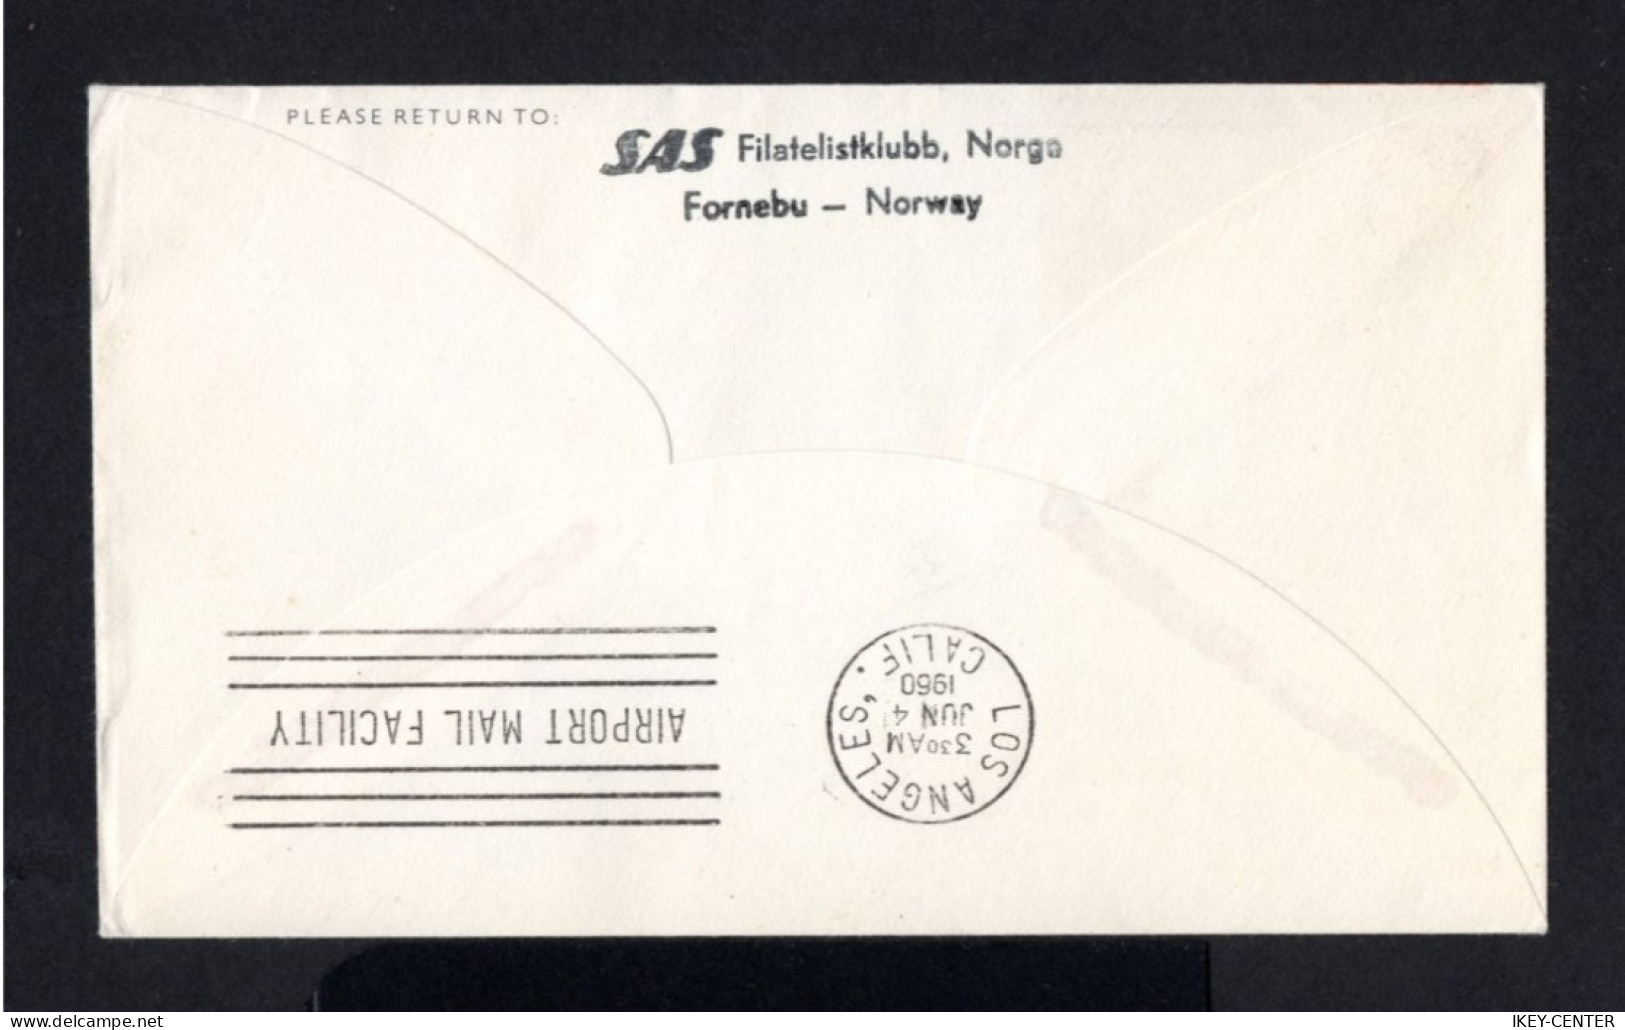 S4608-NORWAY-AIRMAIL COVER OSLO To LOS ANGELES (usa).1960.NORGE.First Jet Flight - Covers & Documents